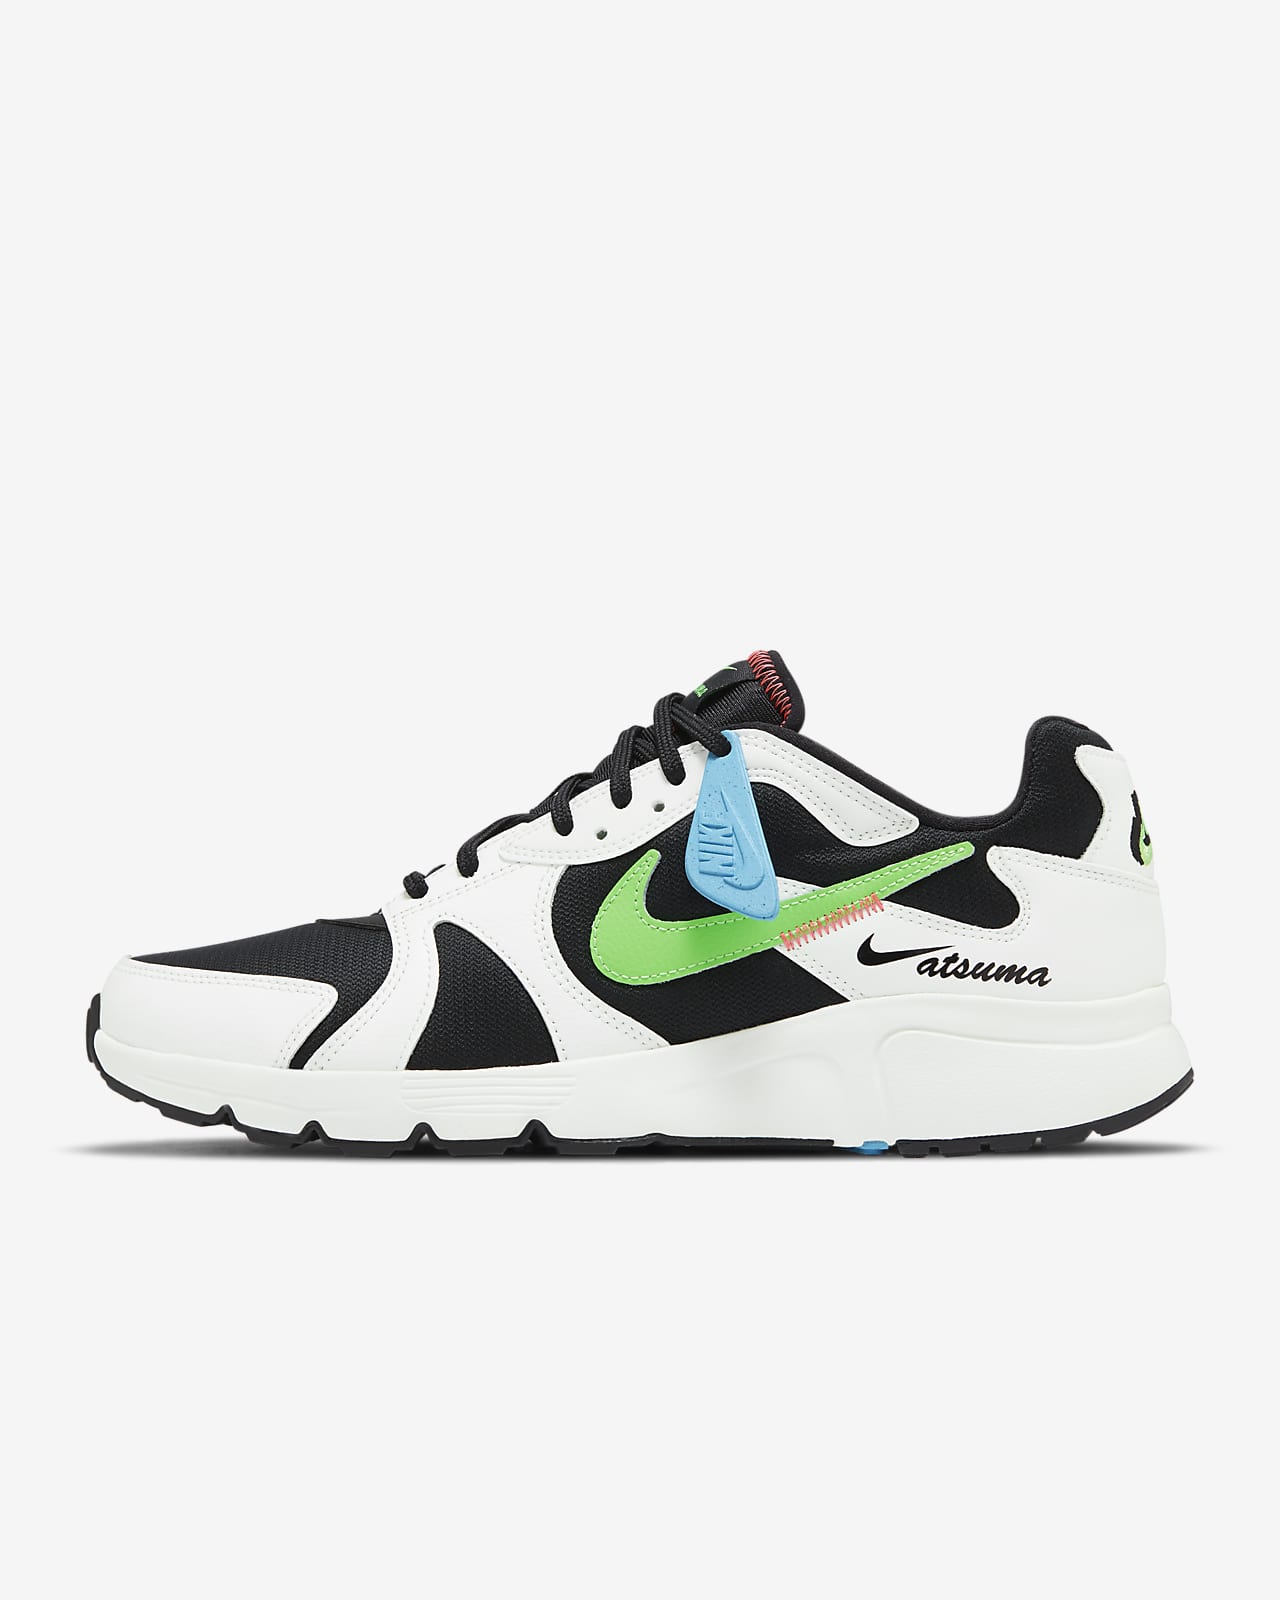 nike mens shoes online